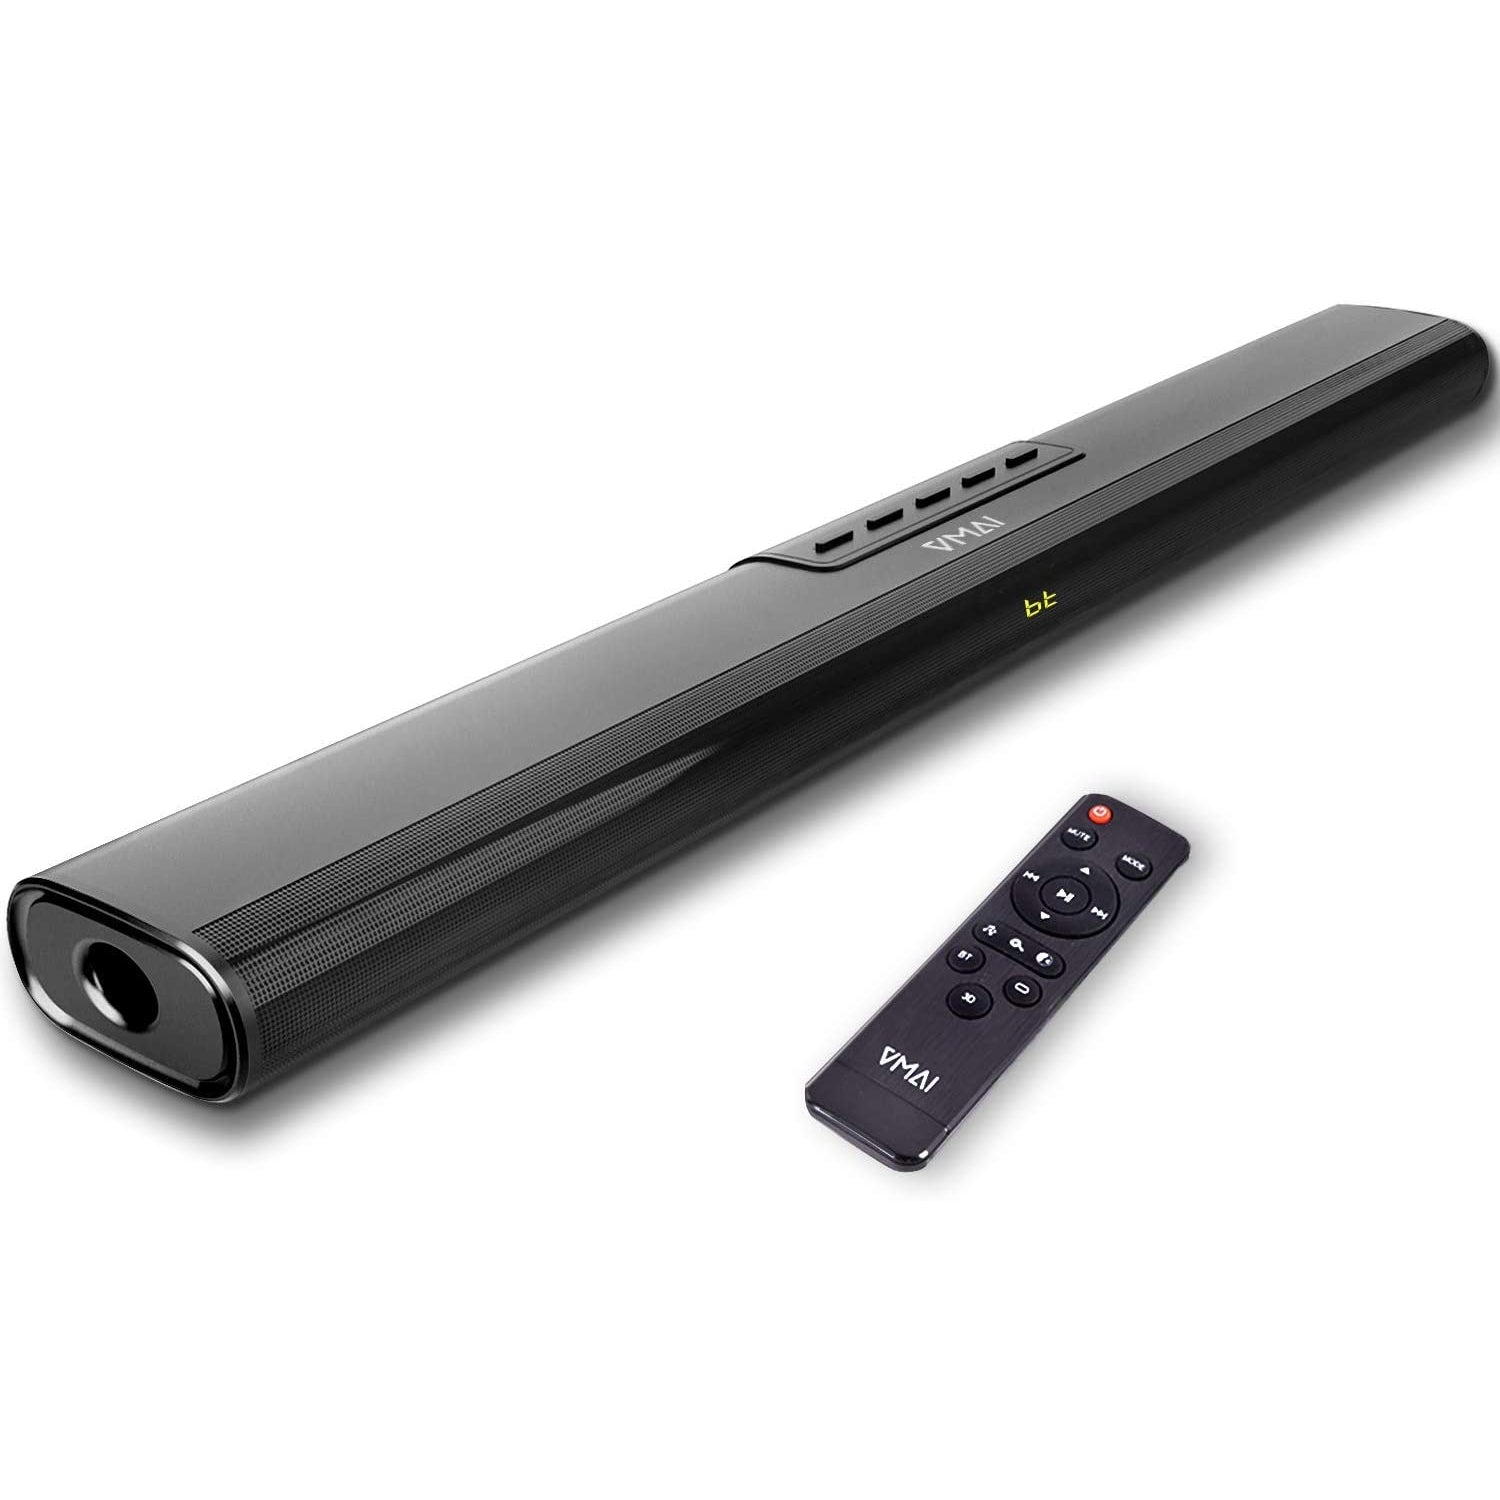 VMAI Soundbar S5 with Built-in Subwoofer, Wired & Wireless Bluetooth 5.0 Speaker for TV